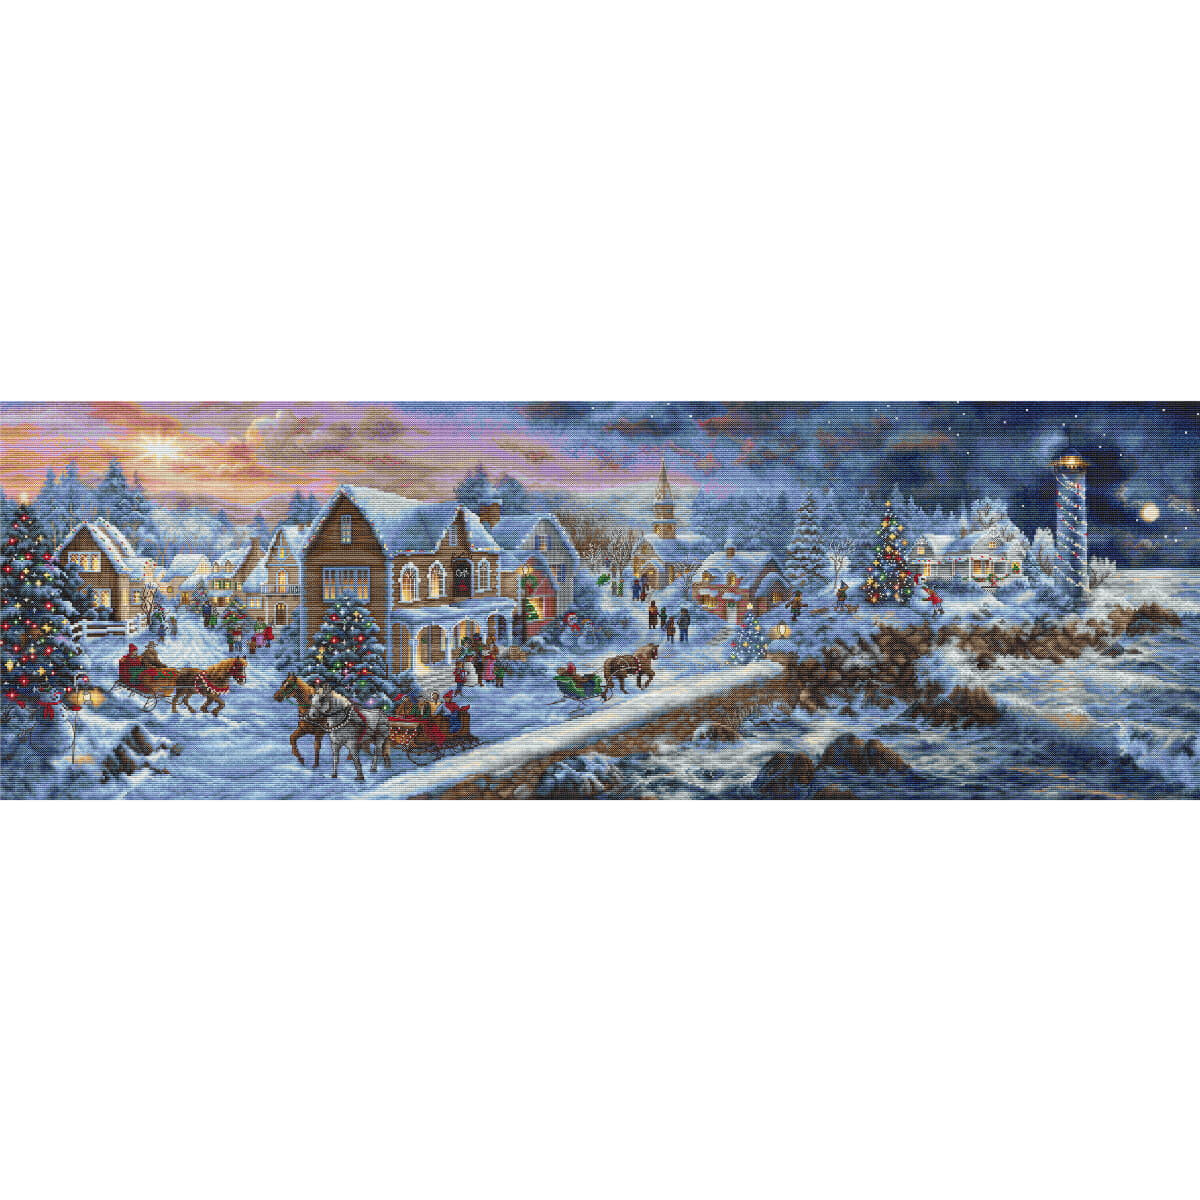 Letistitch counted cross stitch kit "Holiday at...